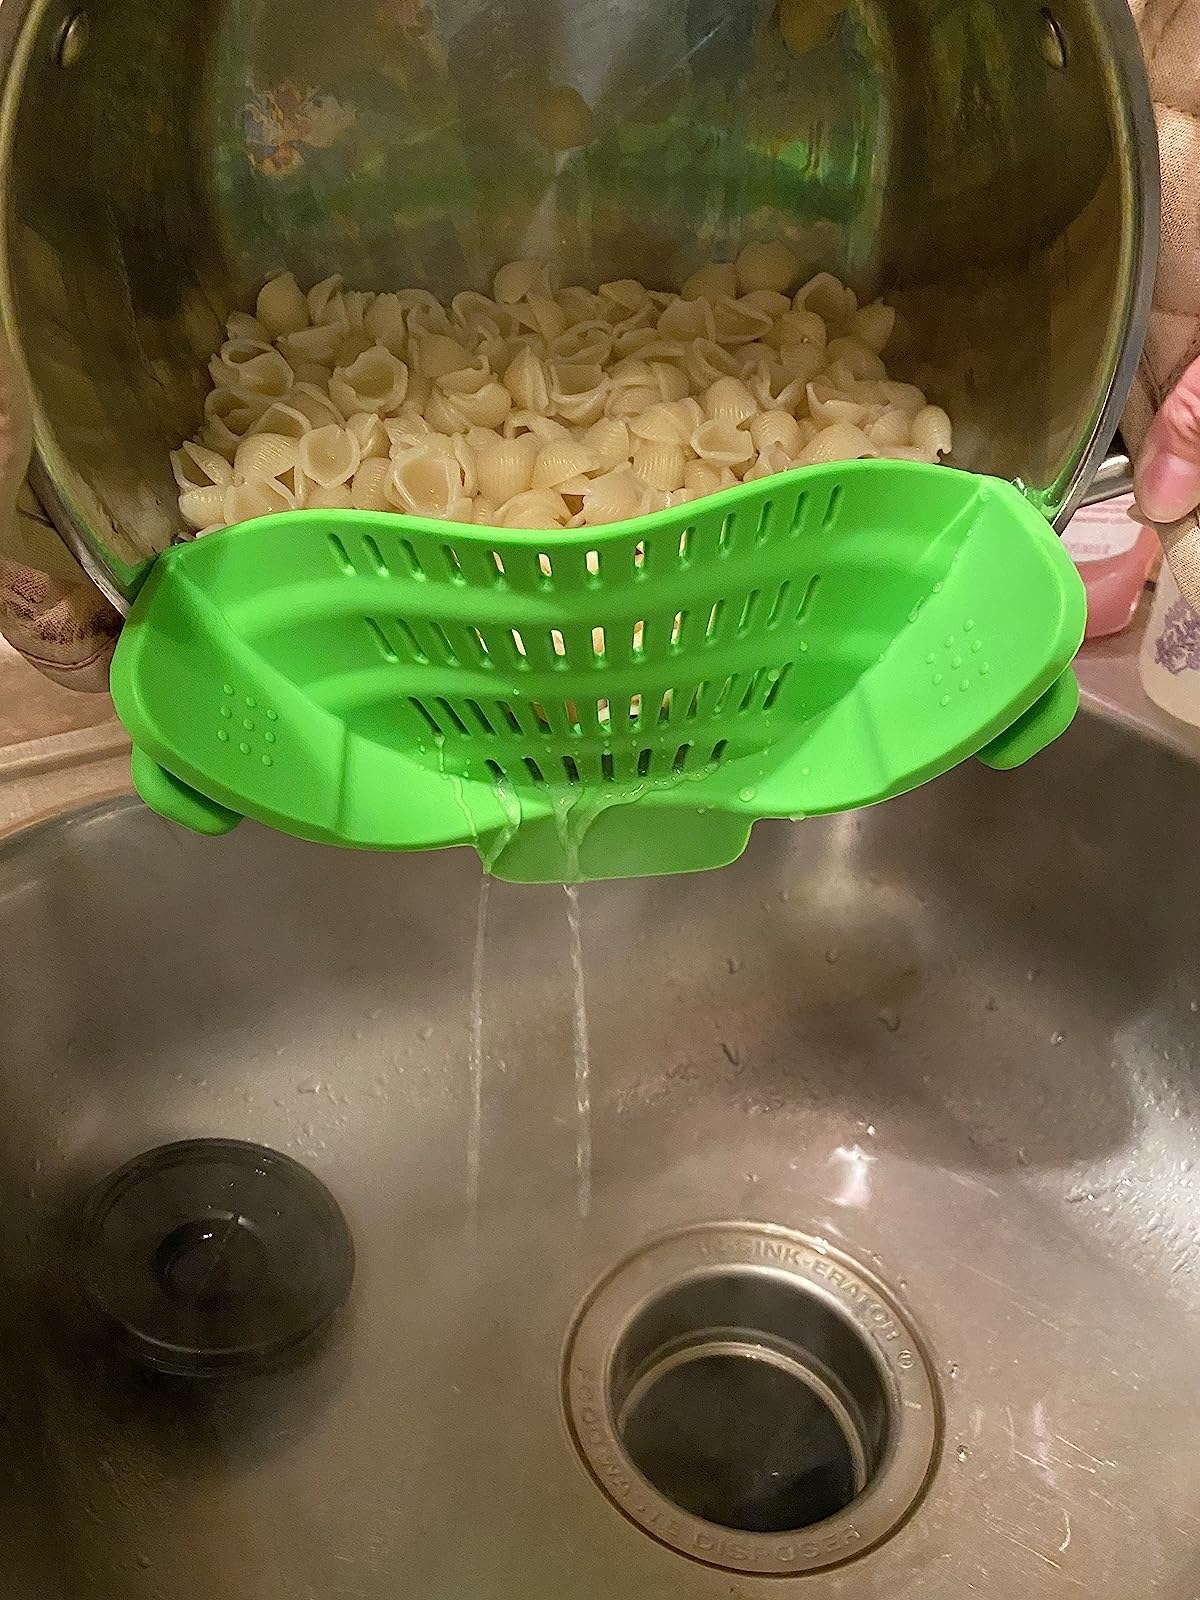 Reviewer straining water from pot of shell pasta noodles with green clip-on strainer attached to pot rim